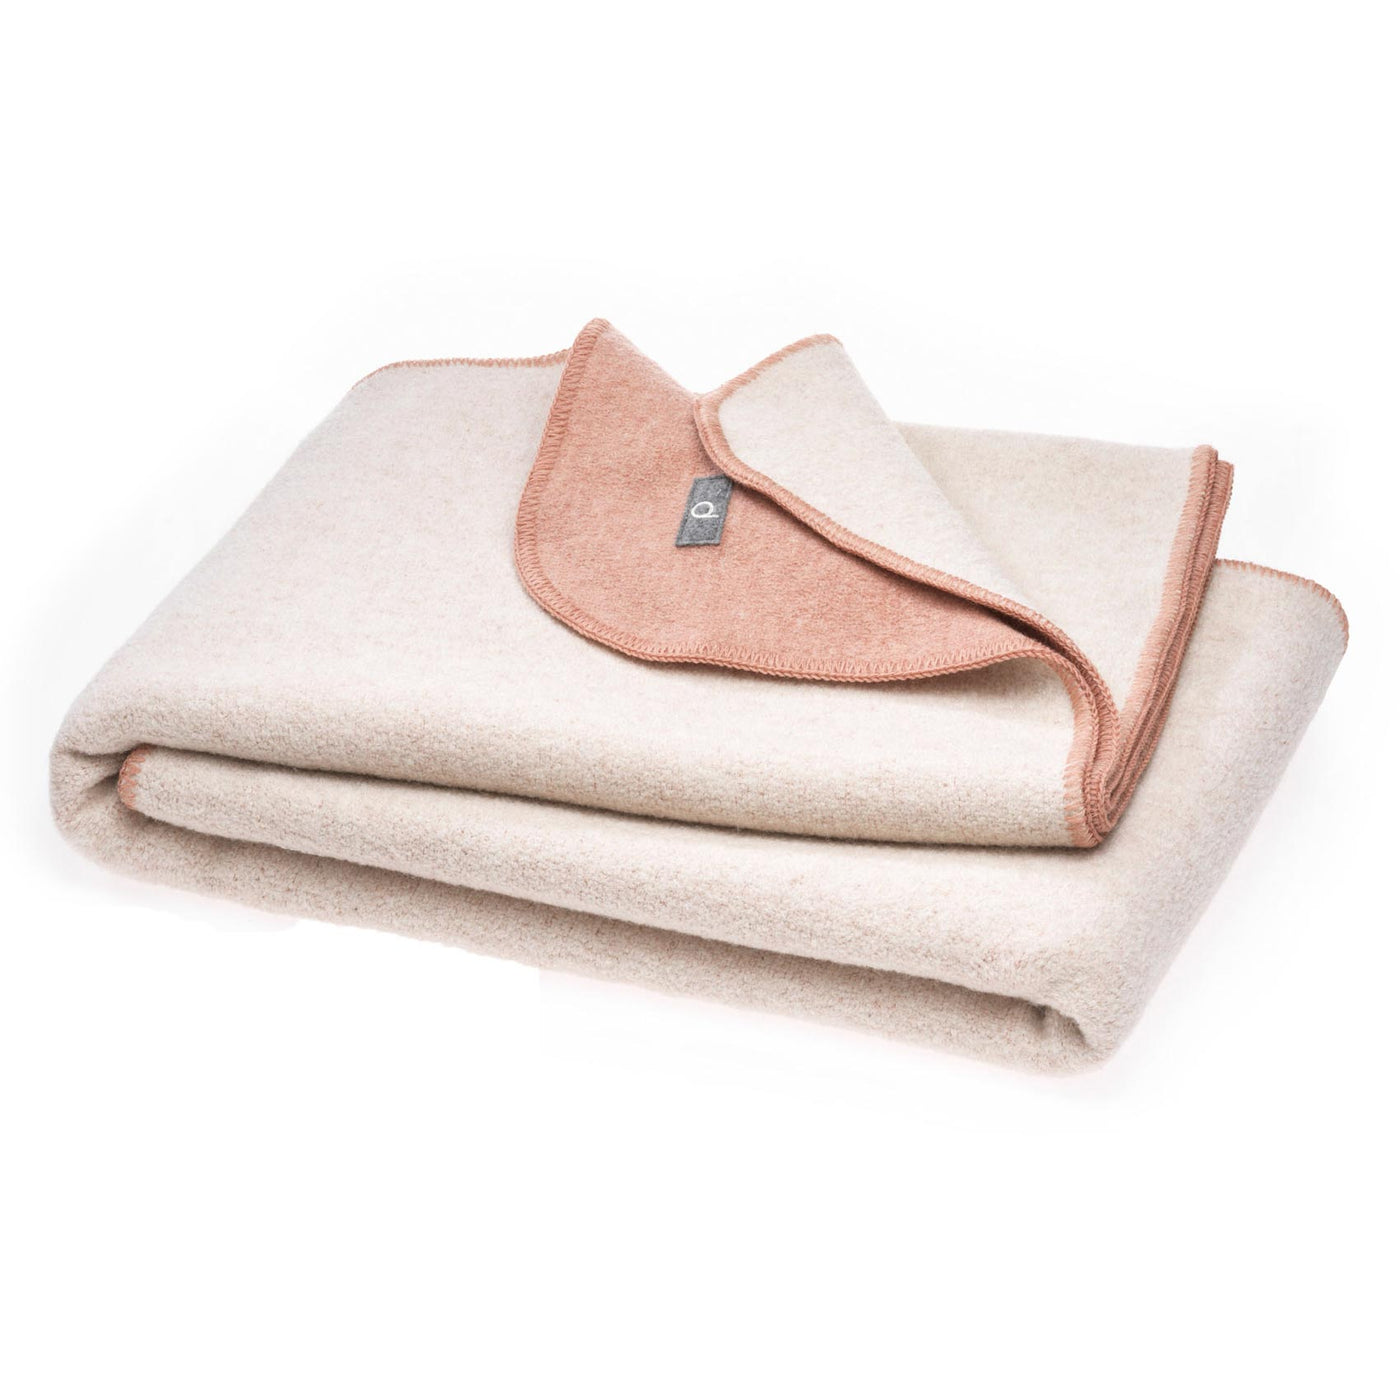 Disana doubleface boiled wool blanket rose natural